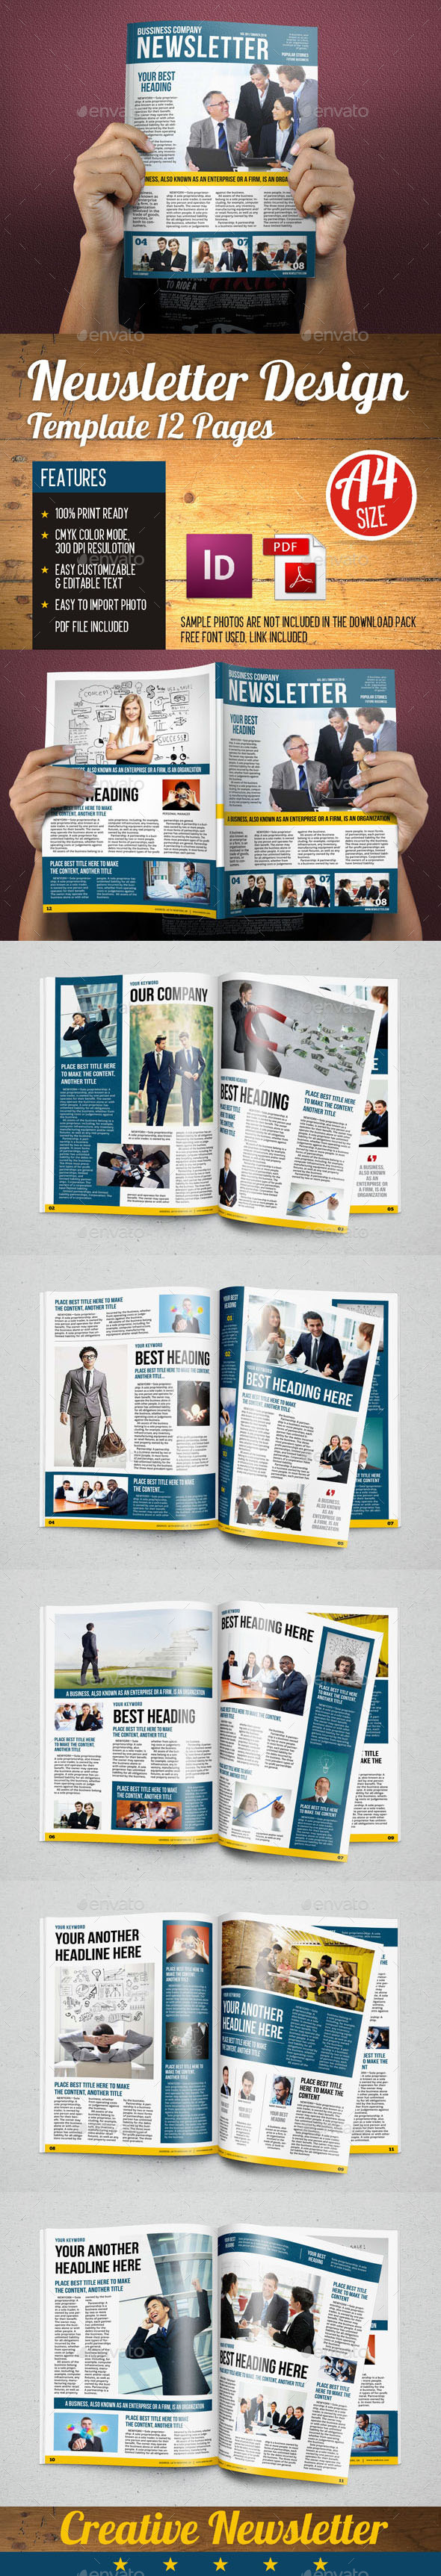 Newsletters Template 12 Pages Vol.3 in Newsletter Templates